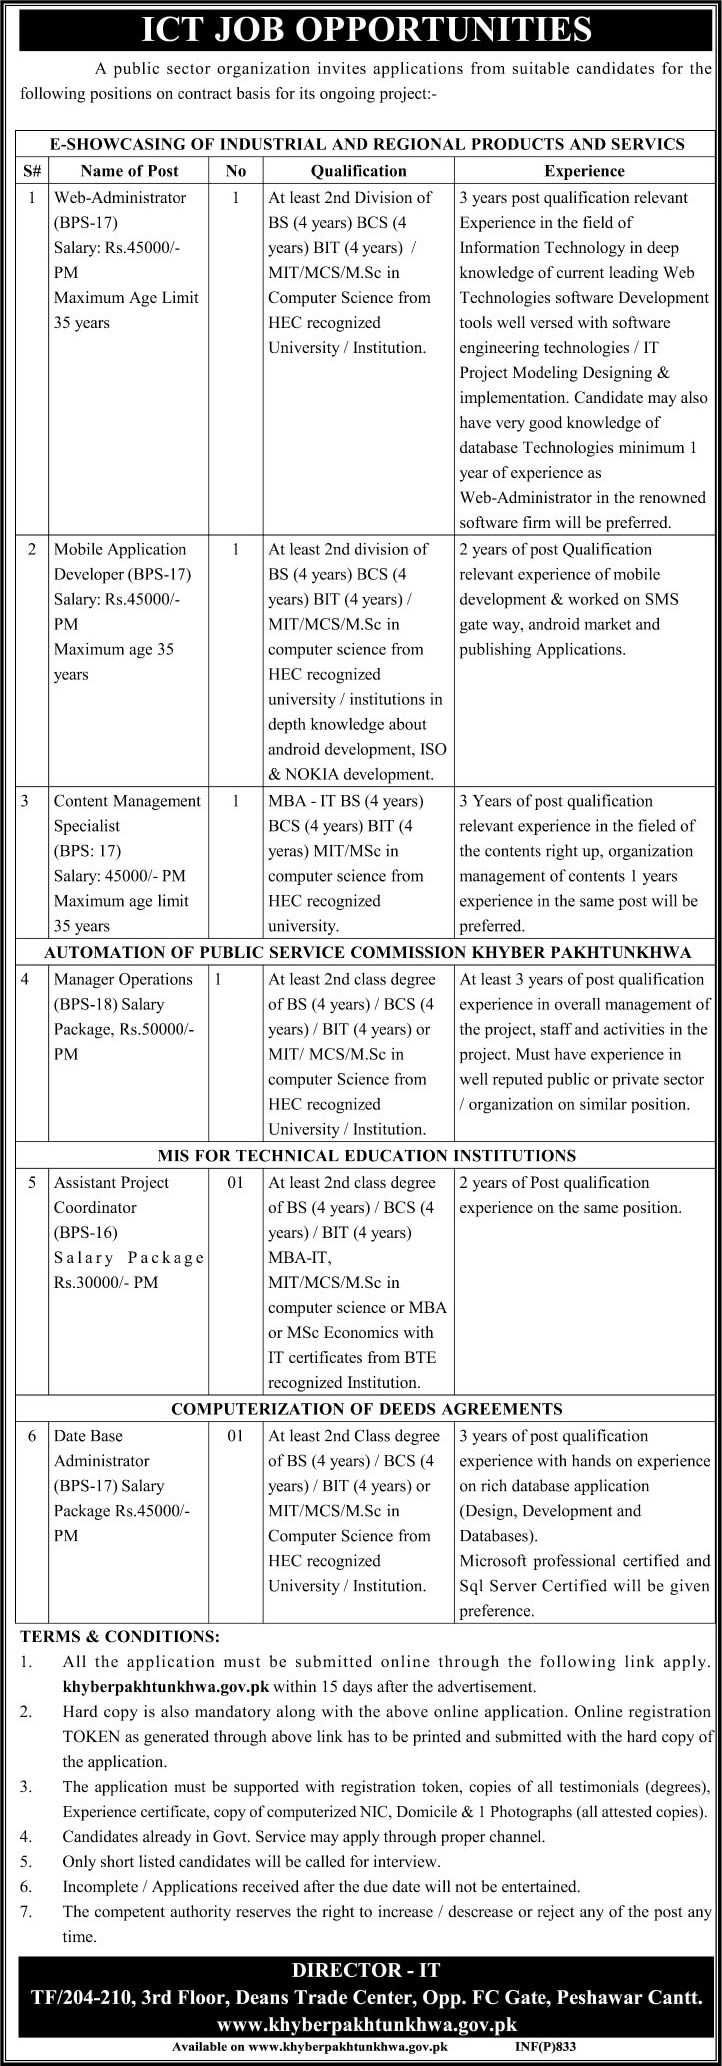 Latest ICT Jobs in KPK 2014 March for Government Projects